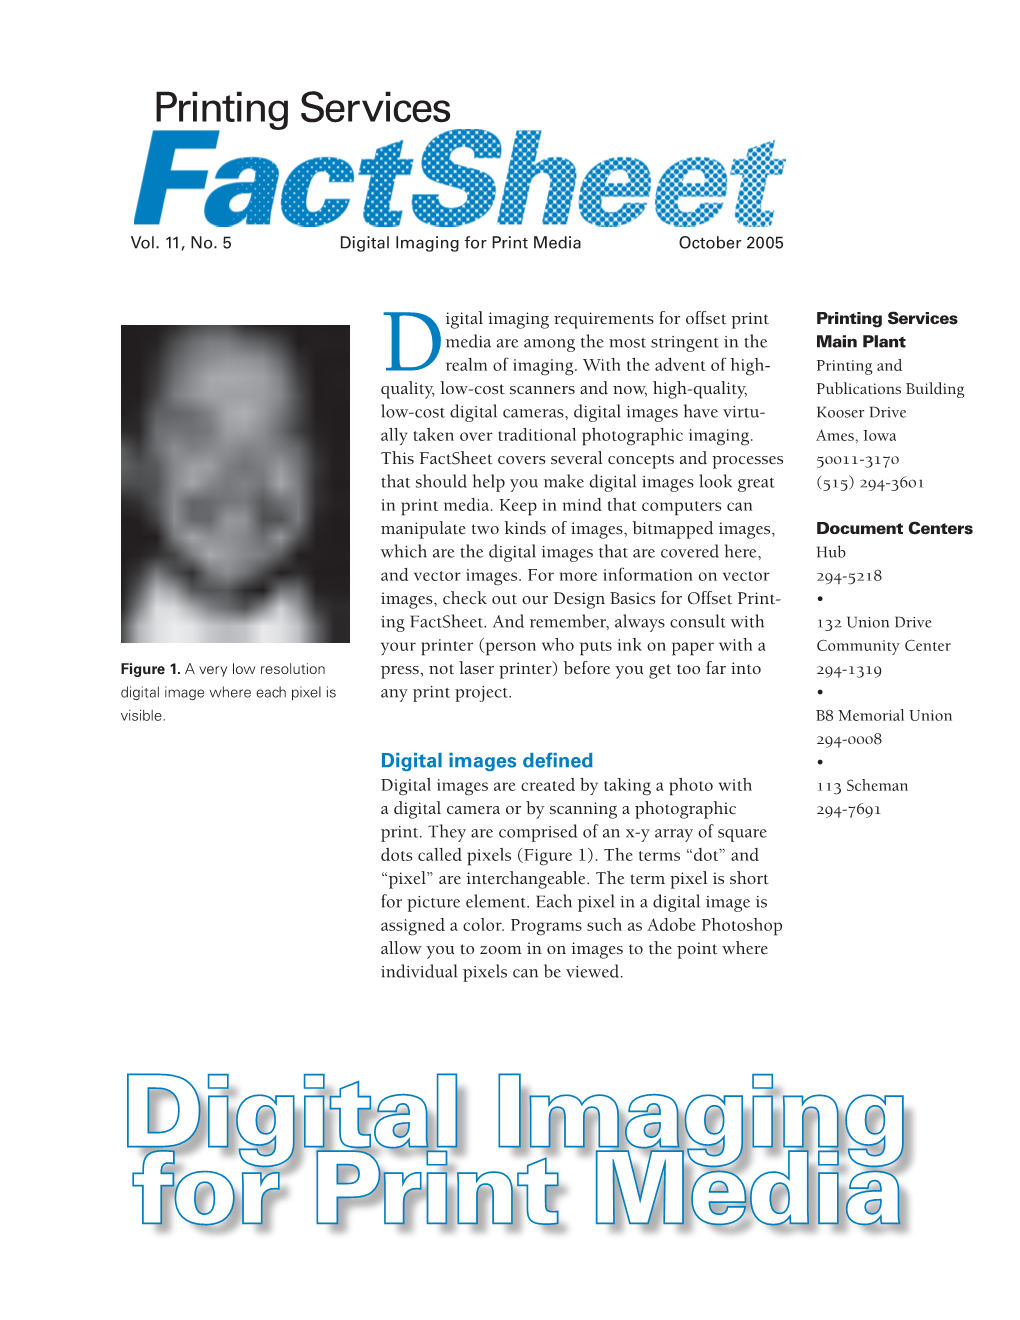 Digital Imaging Requirements for Offset Print